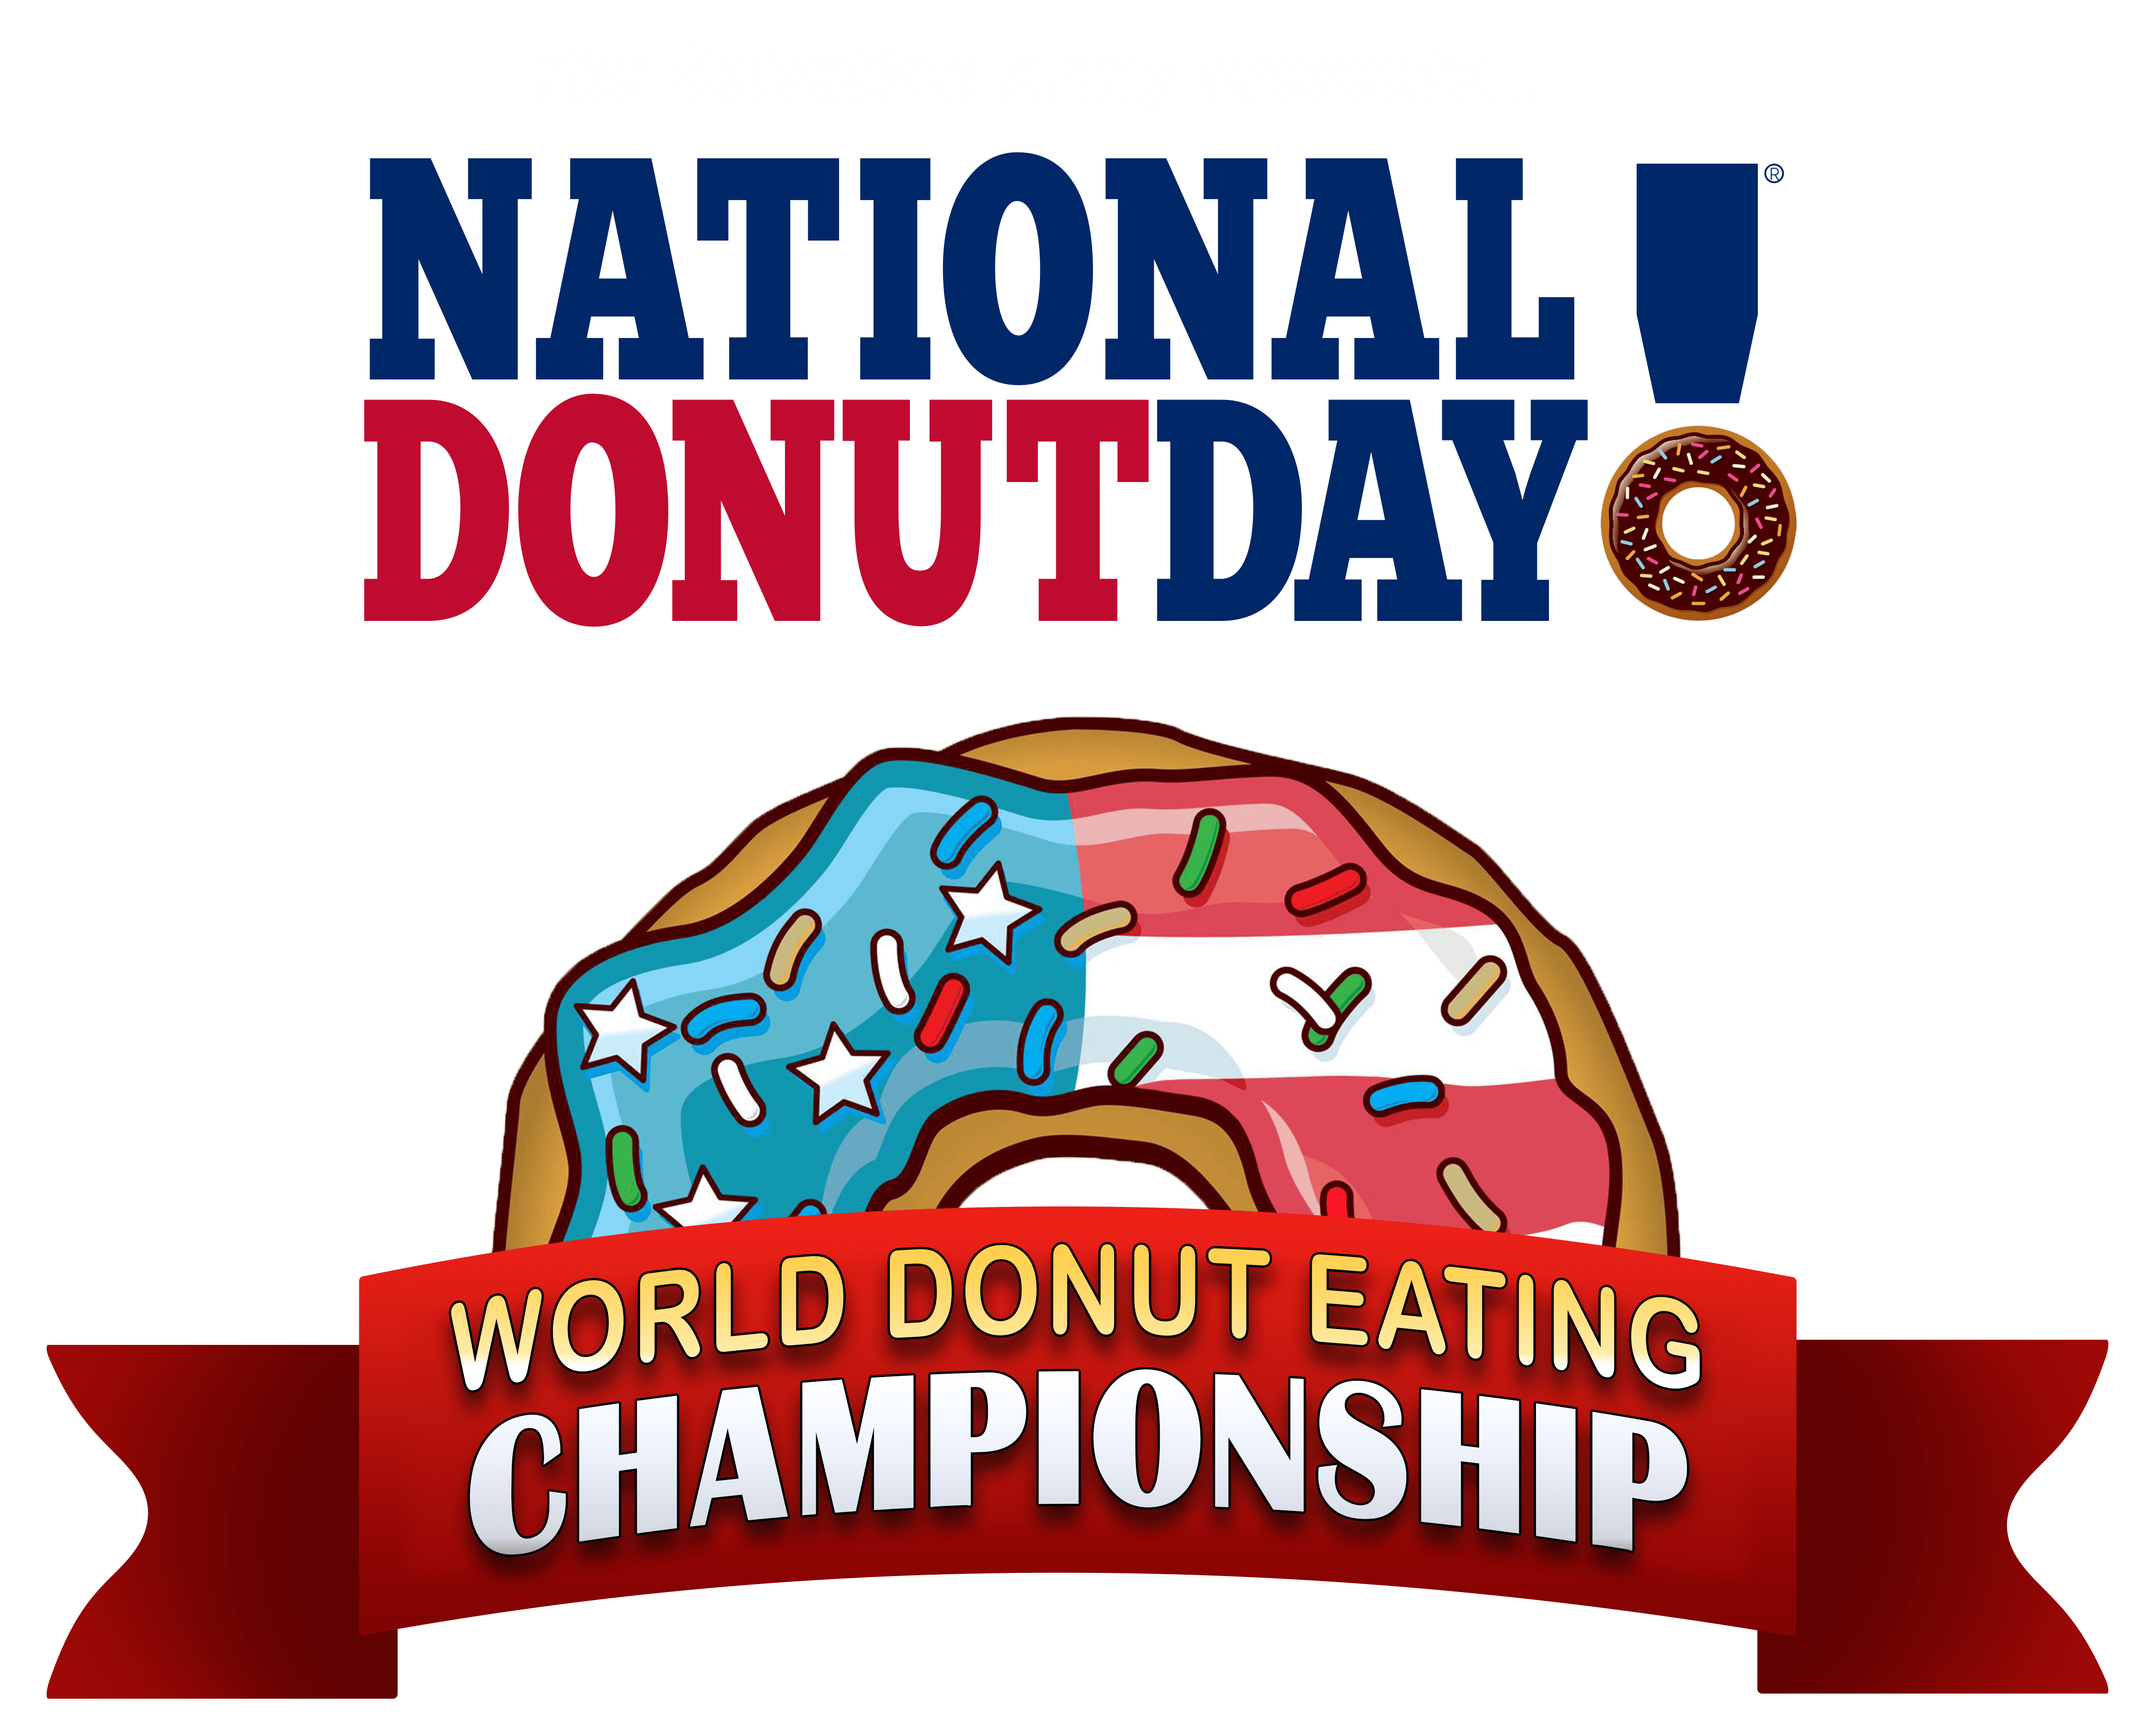 The Salvation Army National Donut Day 2022 Campaign